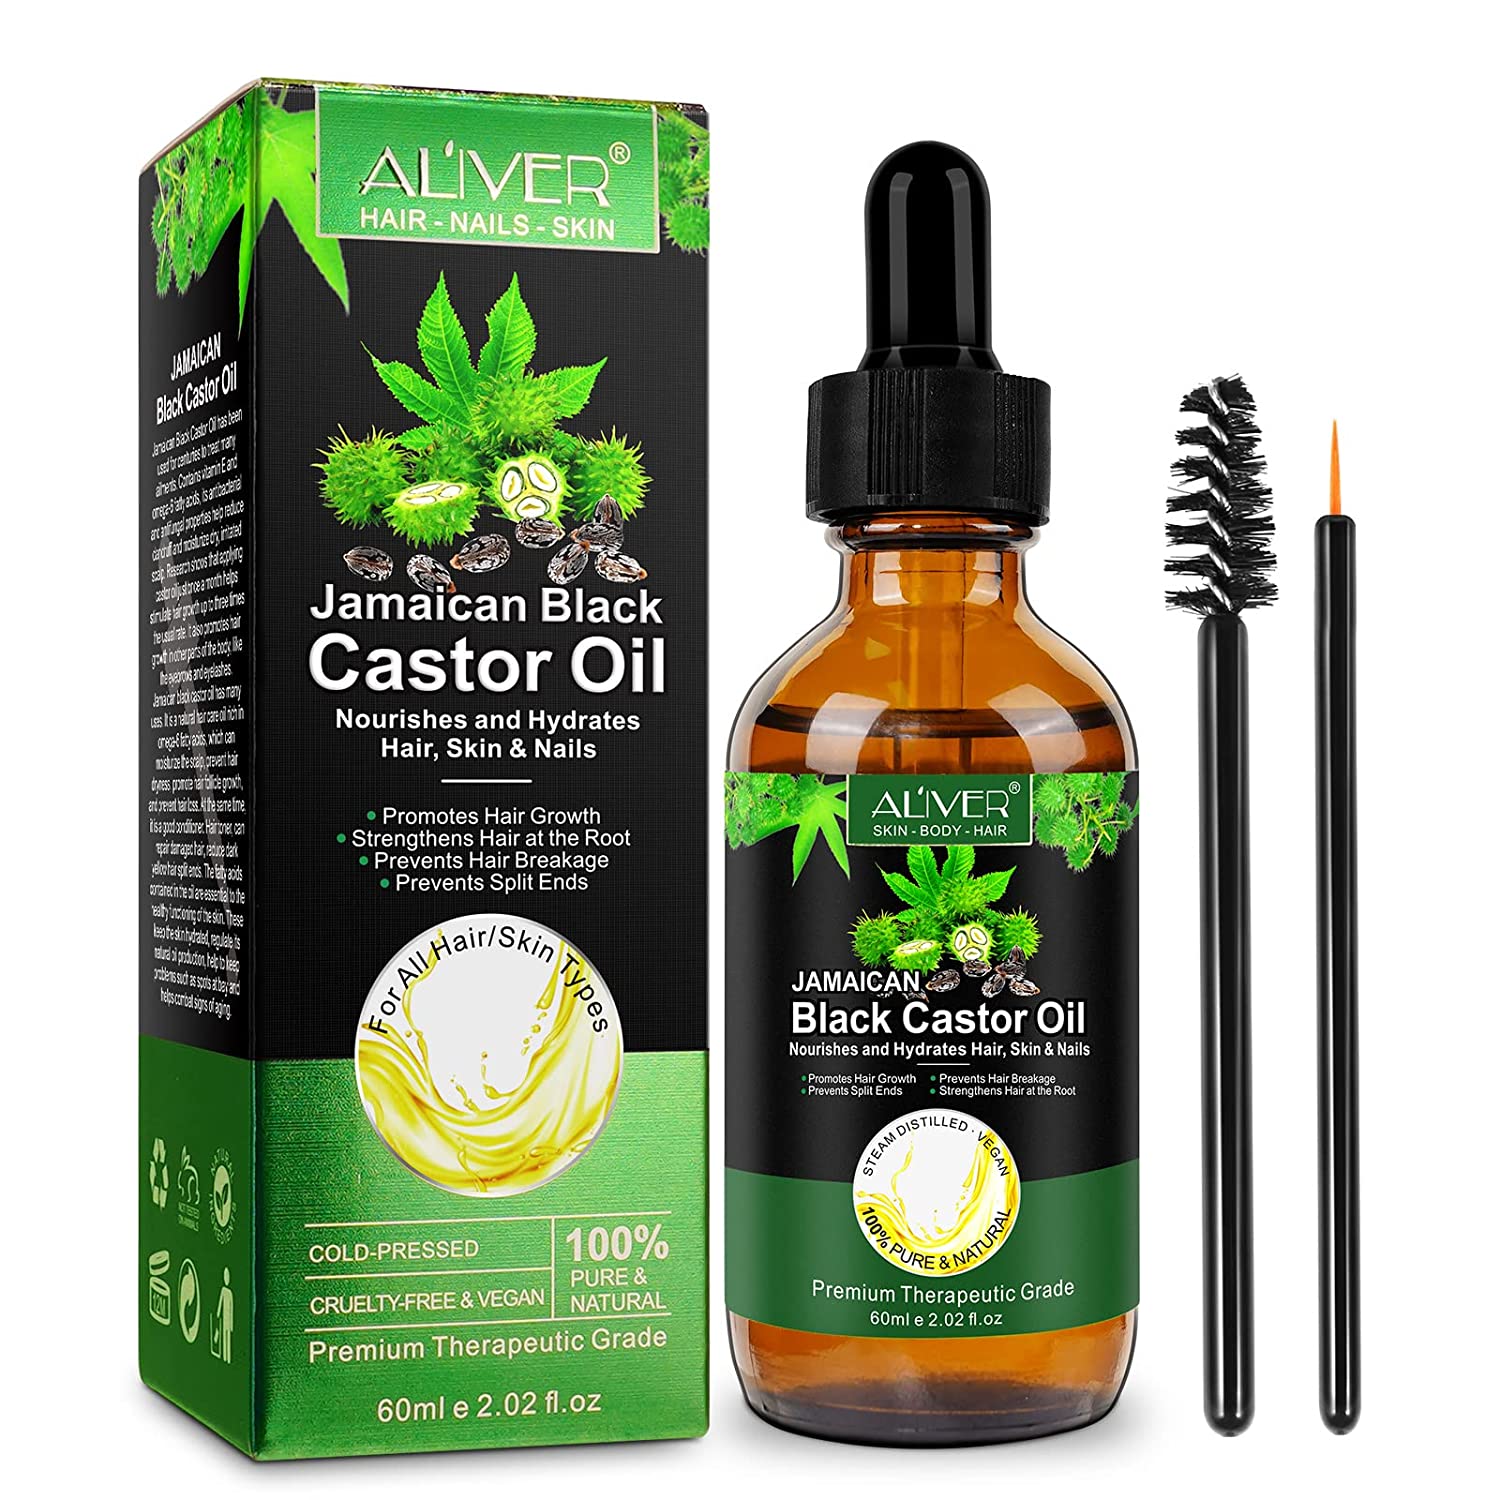 Honest Forwarder  hunelaer Cold Pressed Castor Oil, 100% Pure, Organic  Castor Oil for Hair Growth, Natural Castor Oil for Body, Hair, Nails,  Eyelashes, Eyebrows, Gentle and Non-Irritating, 60 ml